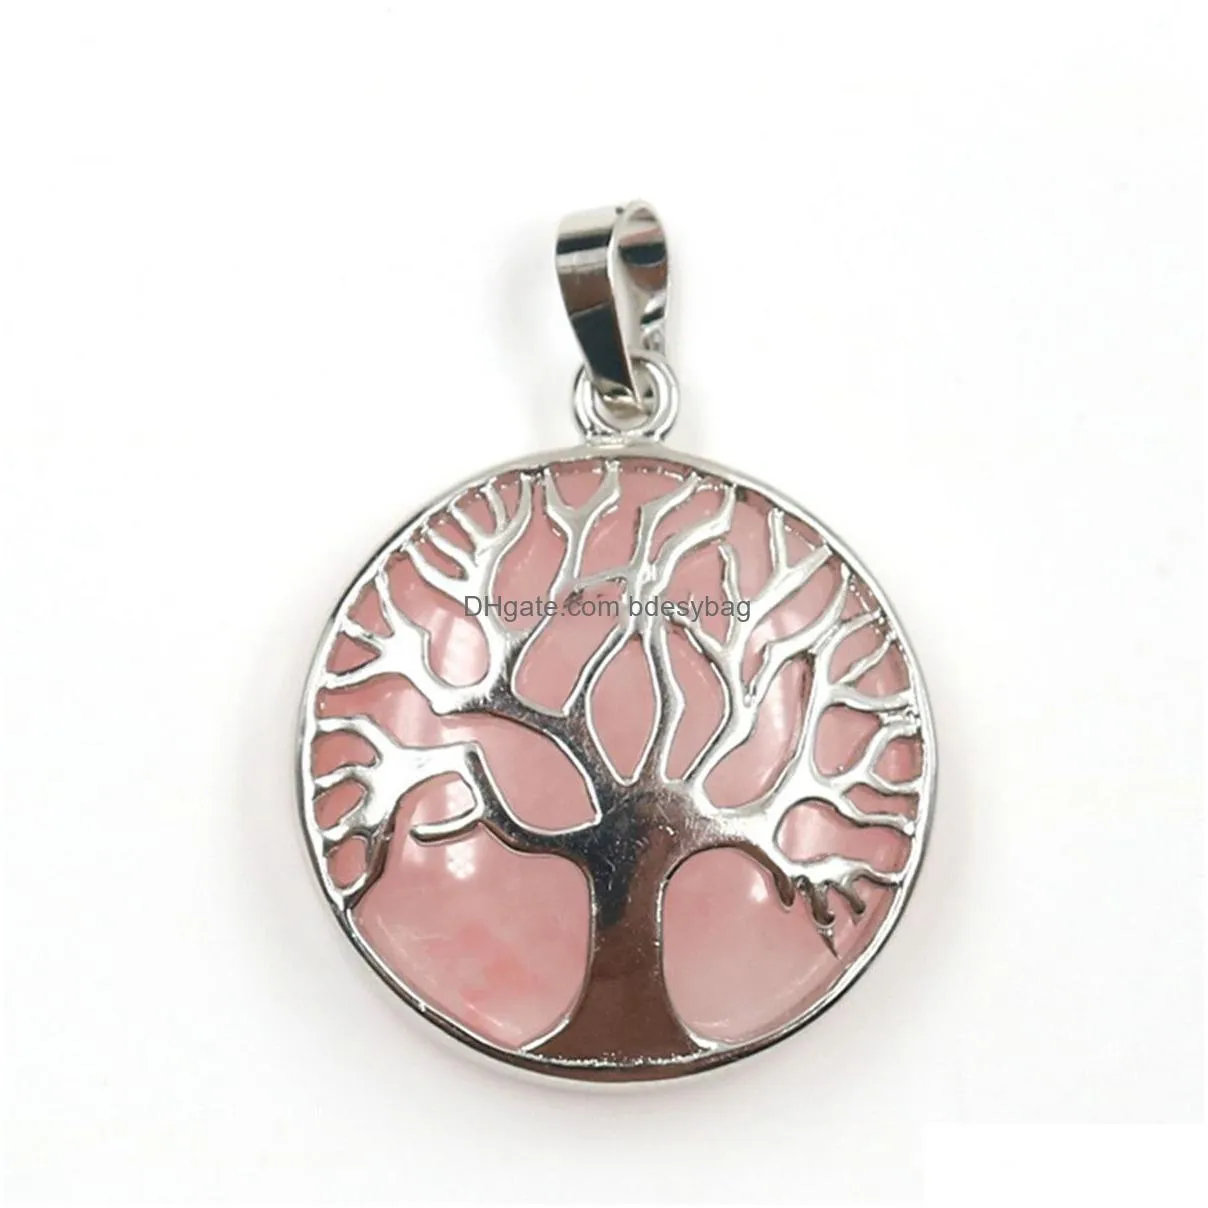 sterling silver gemstone family tree of life pendant necklace dainty jewelry anniversary birthday gifts for girls mom and women